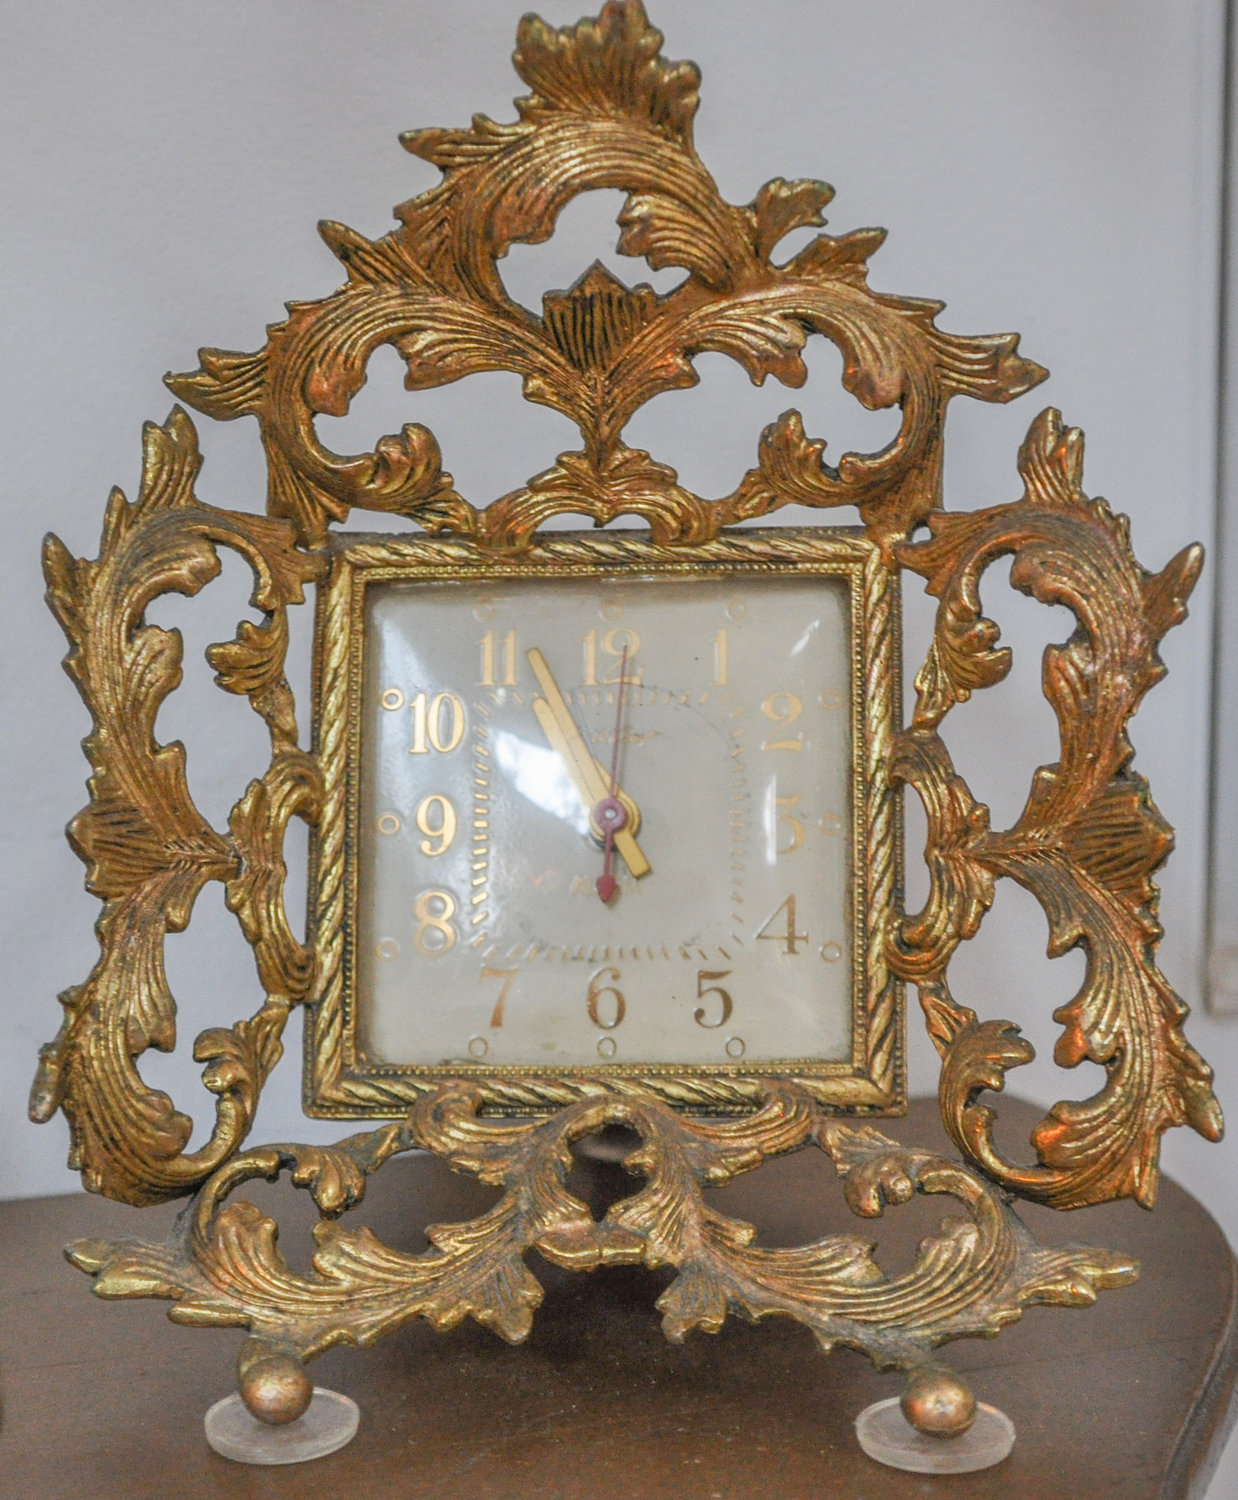 This fancy-schmancy antique-looking clock is actually a Guild Crest "boudoir electric alarm clock," according to the Google, and "hard to find"—yet I instantly found one just like it on eBay for $39 when I looked it up online. Mine, of course, was a gift. LOL.